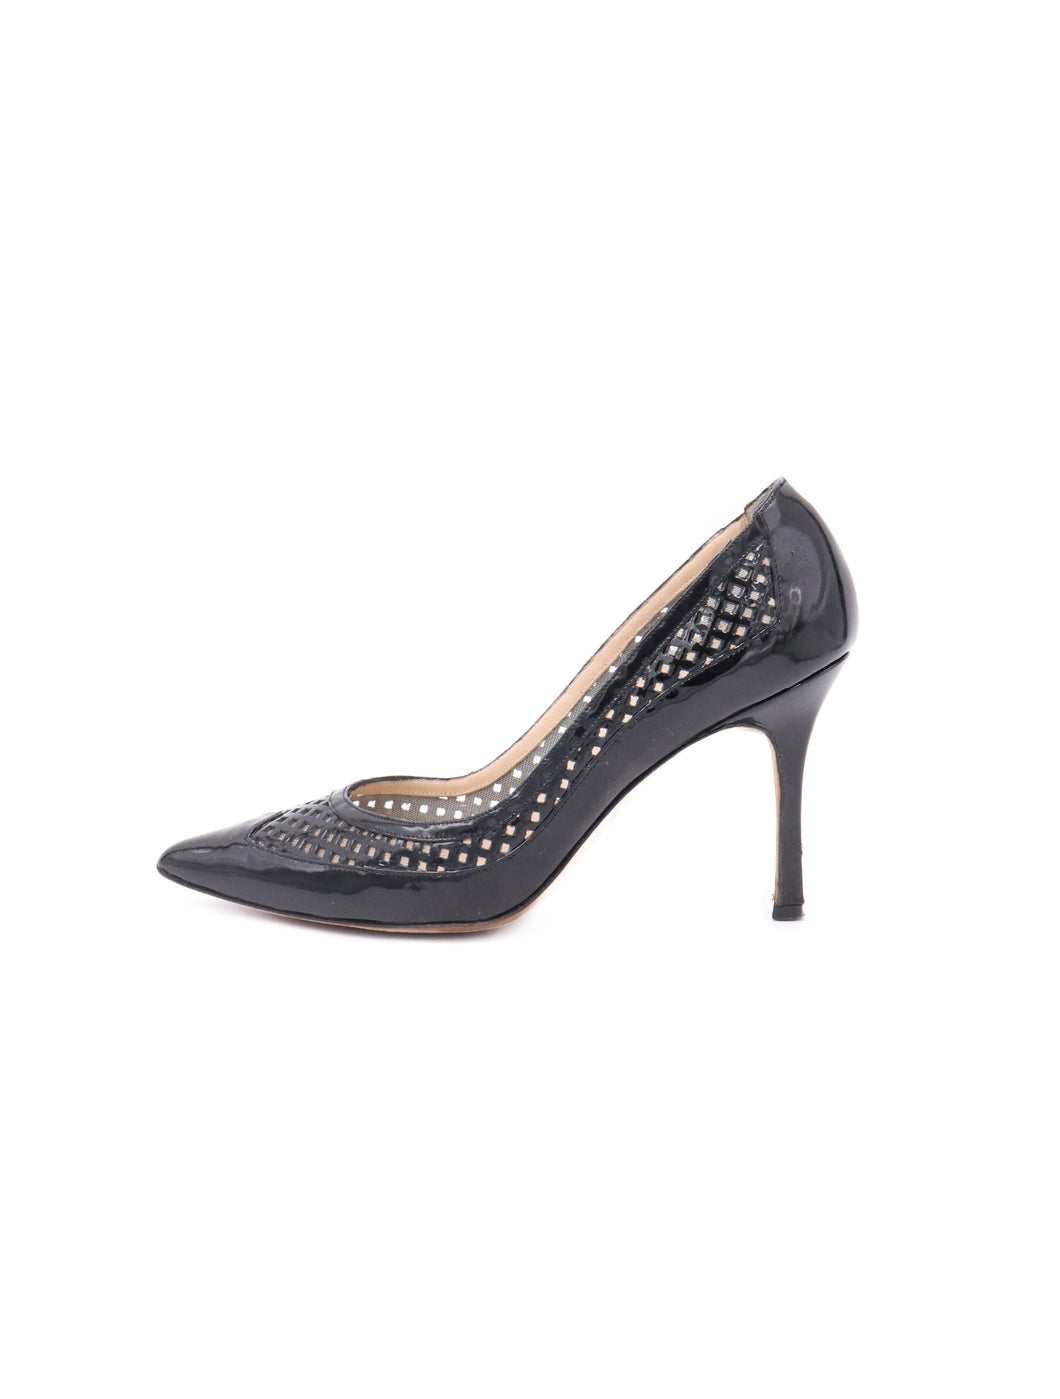 Manolo Blahnik Perforated Patent Leather Pumps